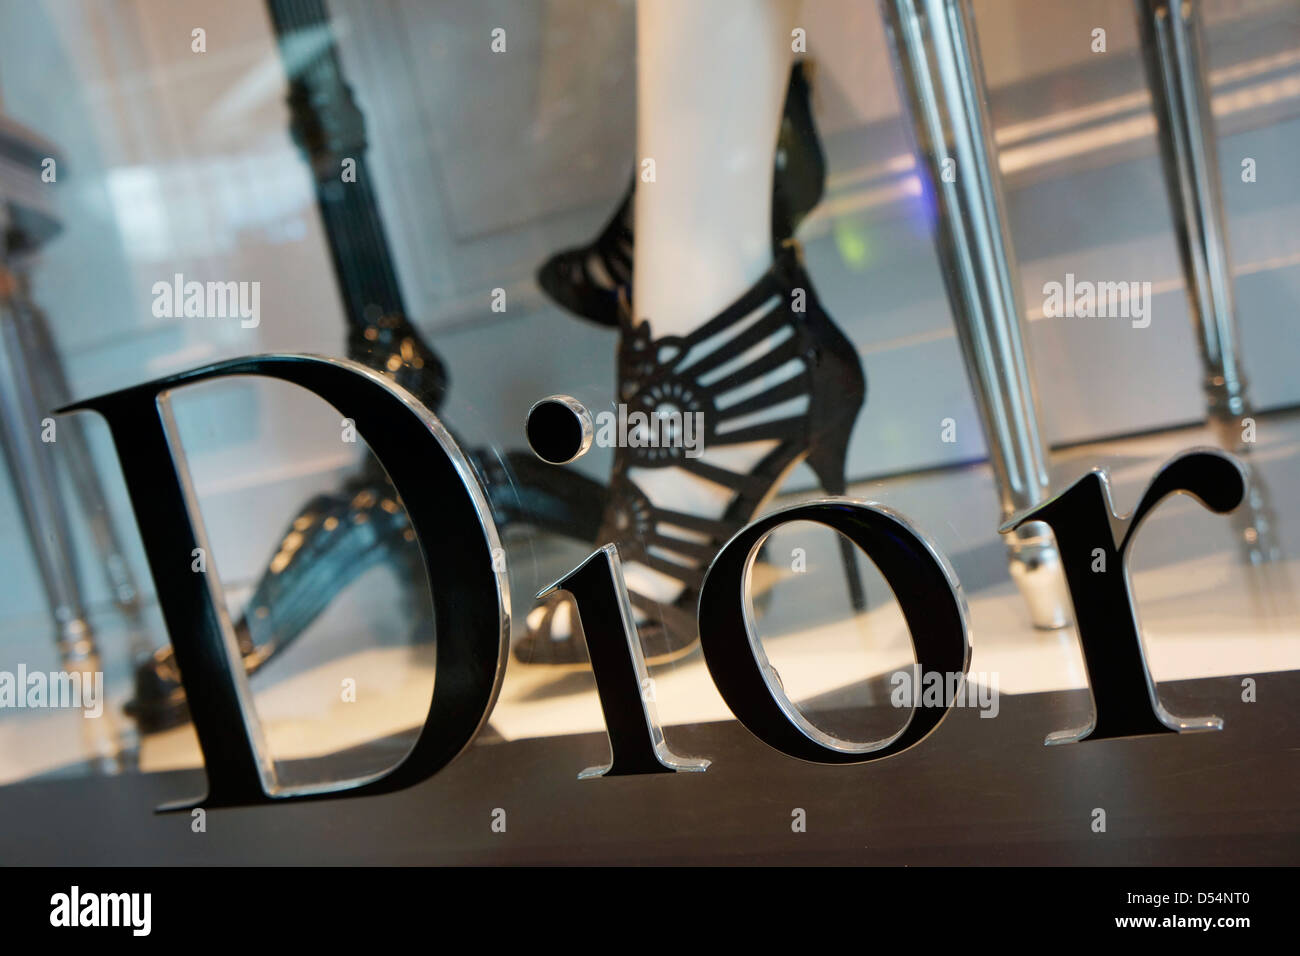 Dior Store Window Display, Christian Dior Shoe, Shoes Stock Photo